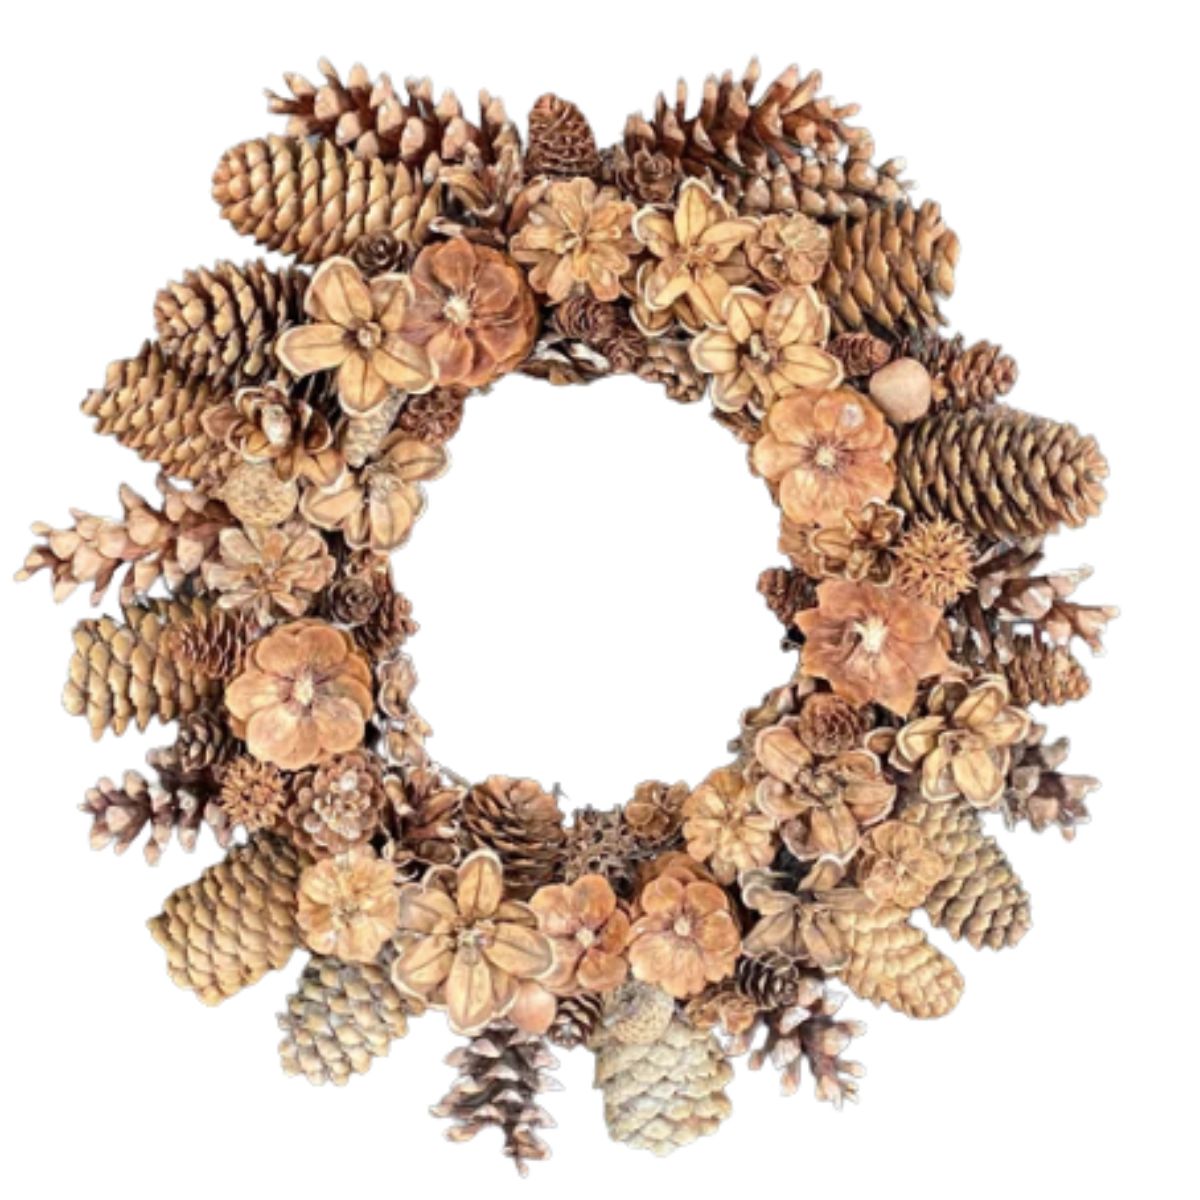 natural pinecone, acorn, and sweet gum seeds wreath from etsy